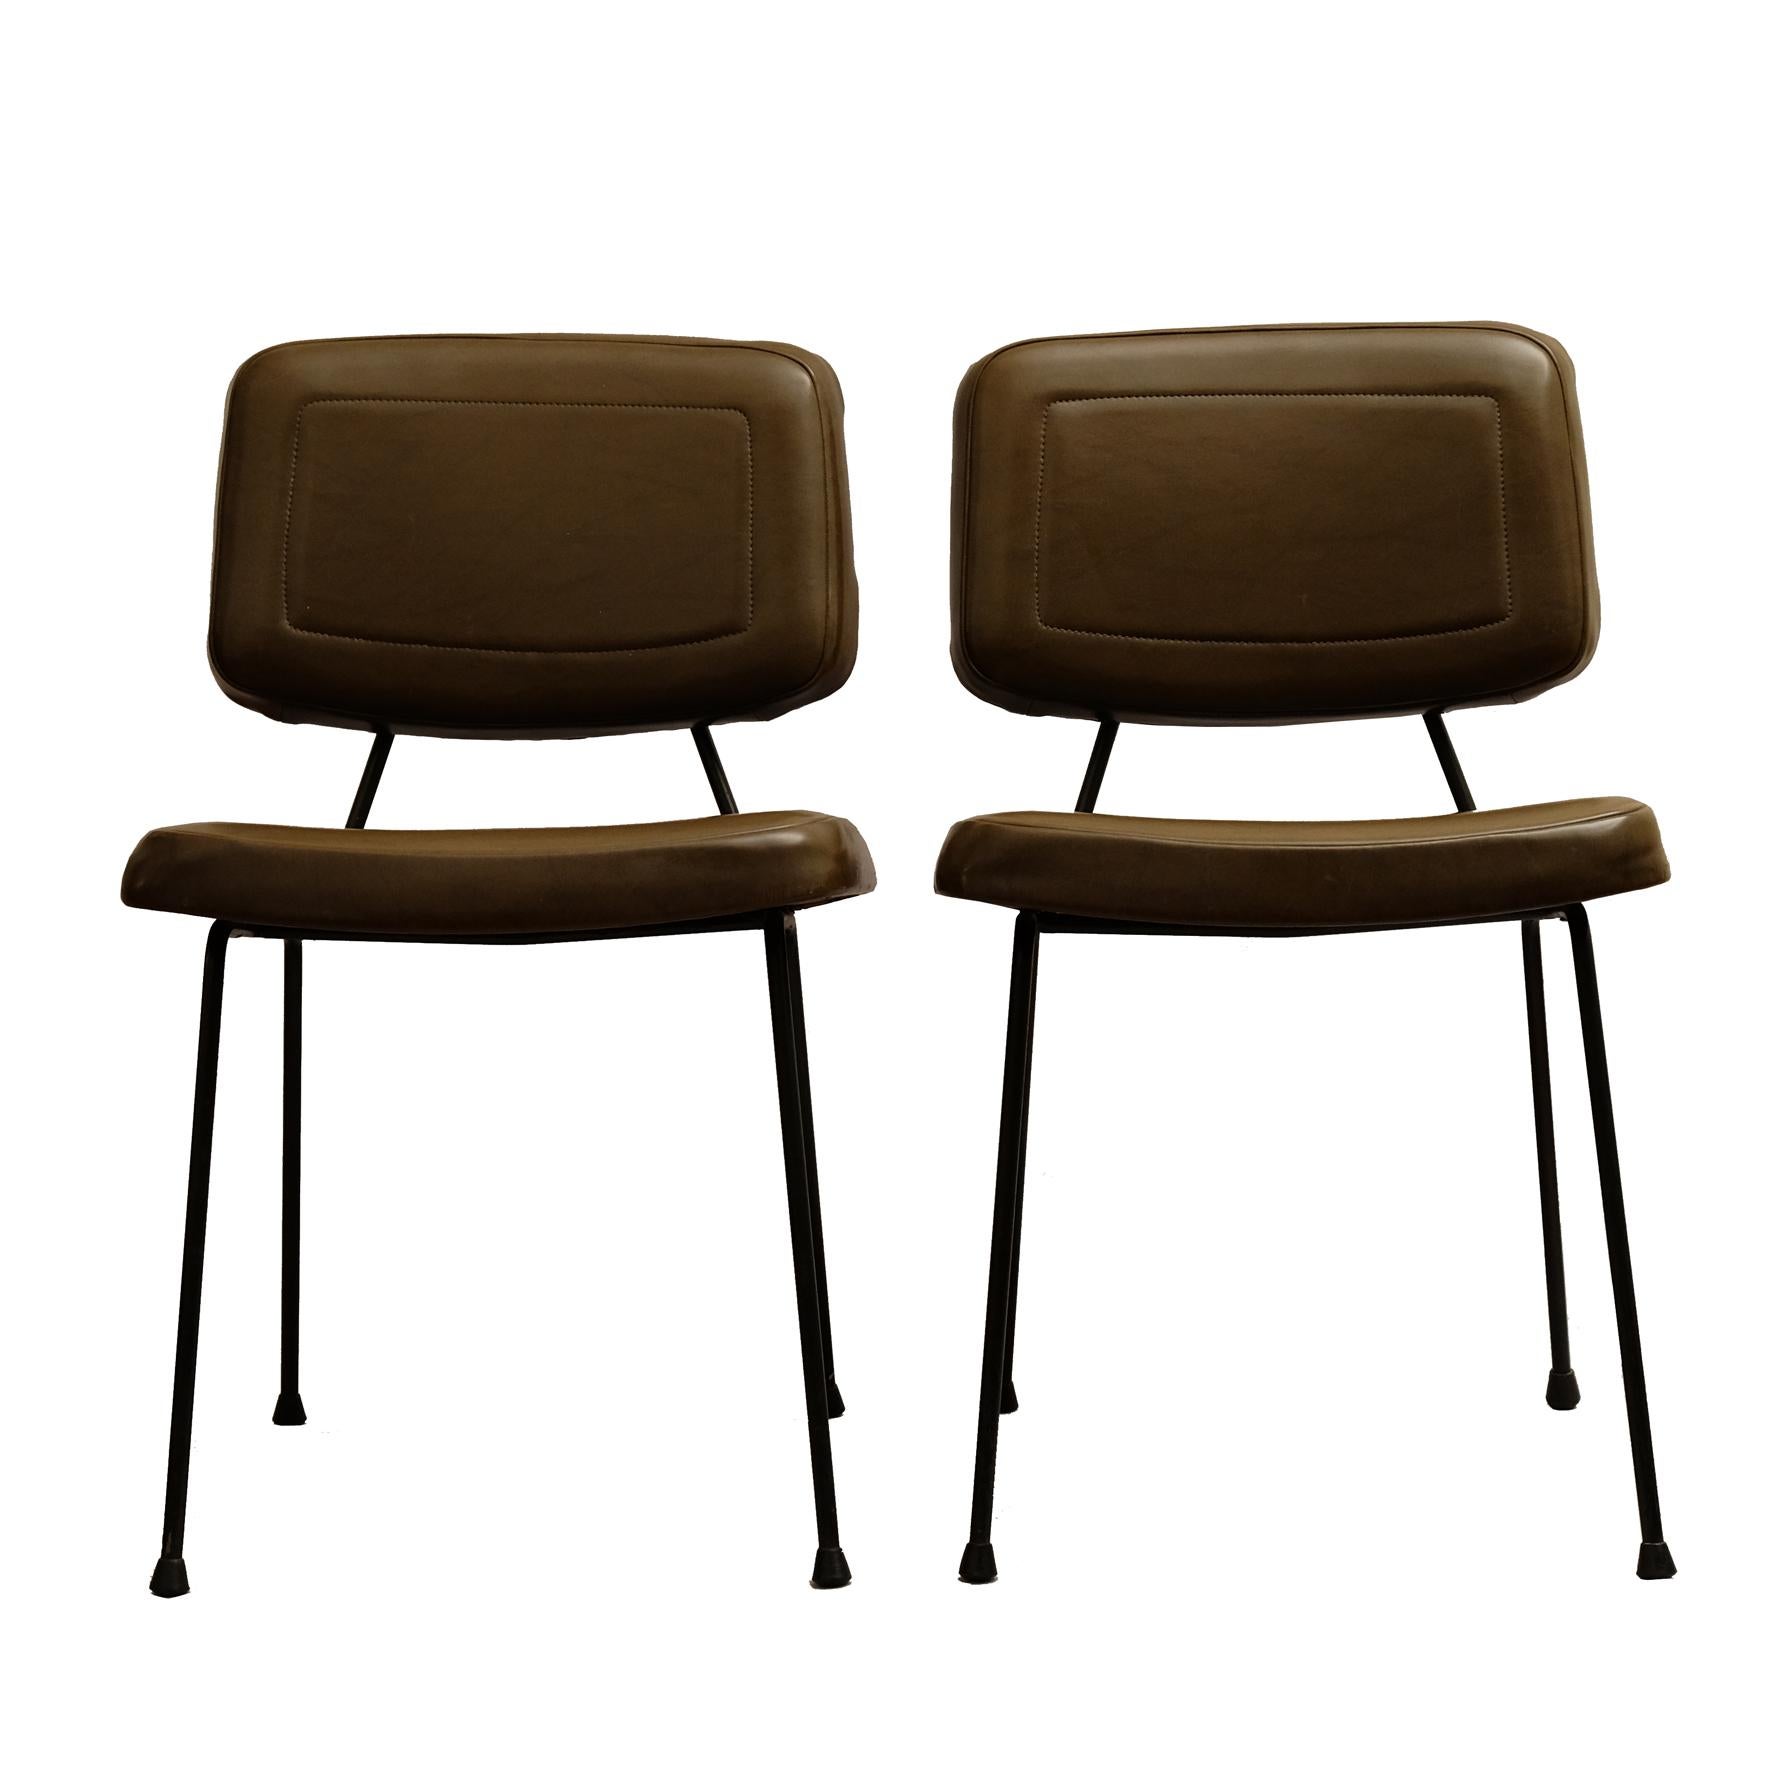 Pierre Paulin, a Pair of Chairs, Model CM 196, Thonet, 1960s (Moderne)